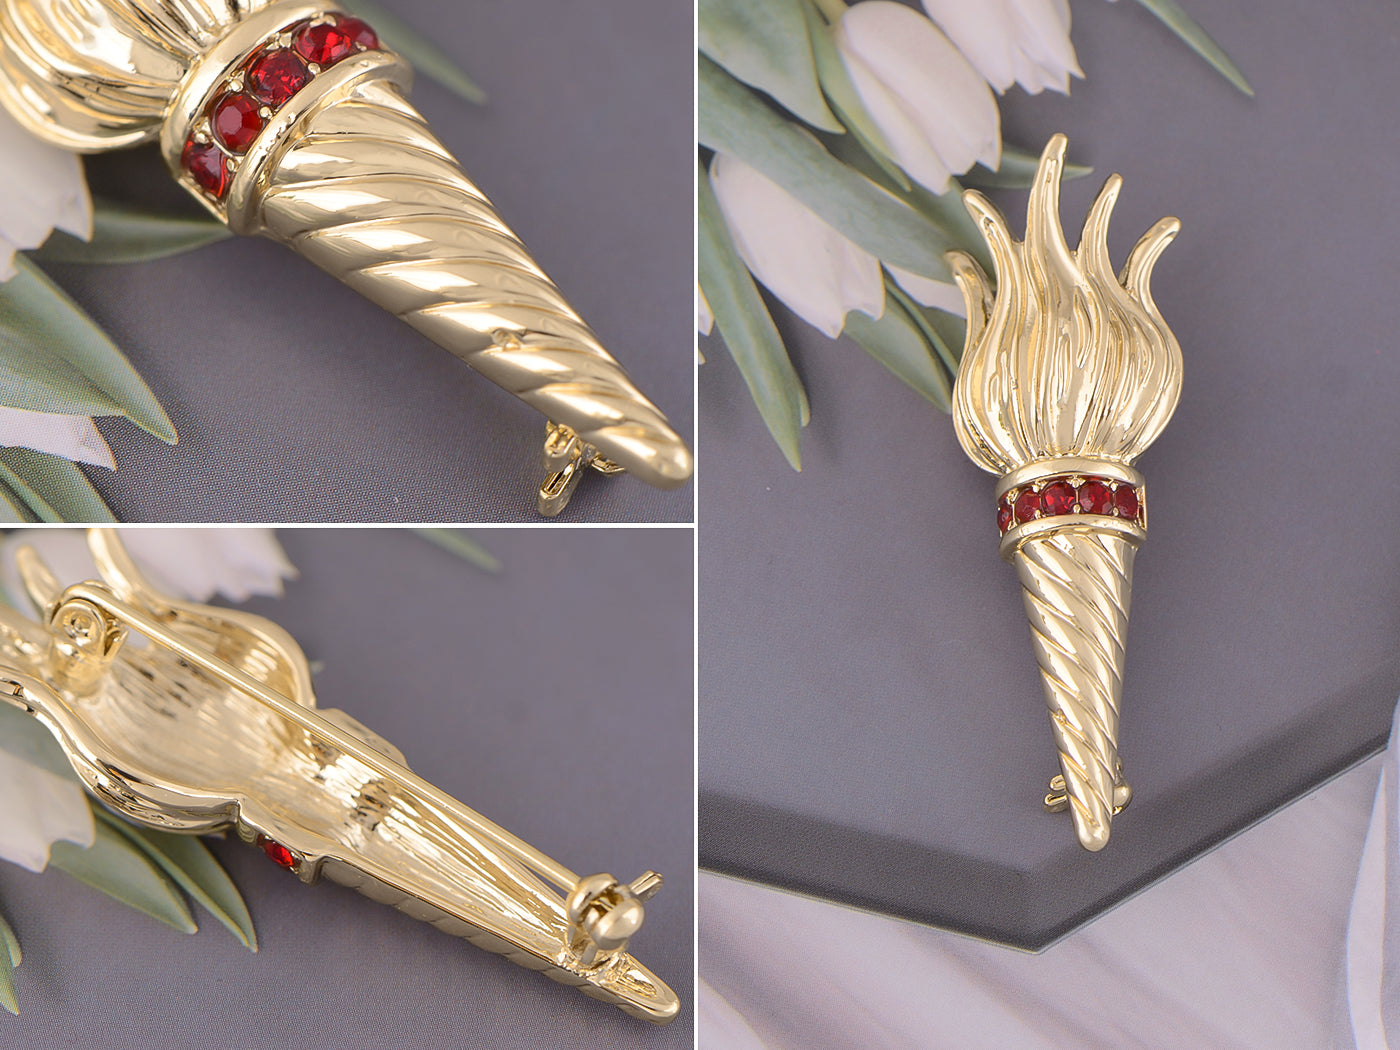 Alilang Golden Torch with Red Stone Detailing Lapel Pin Jewelry Brooch Wedding Decoration Shirt Pin Buttons Sweater Brooches